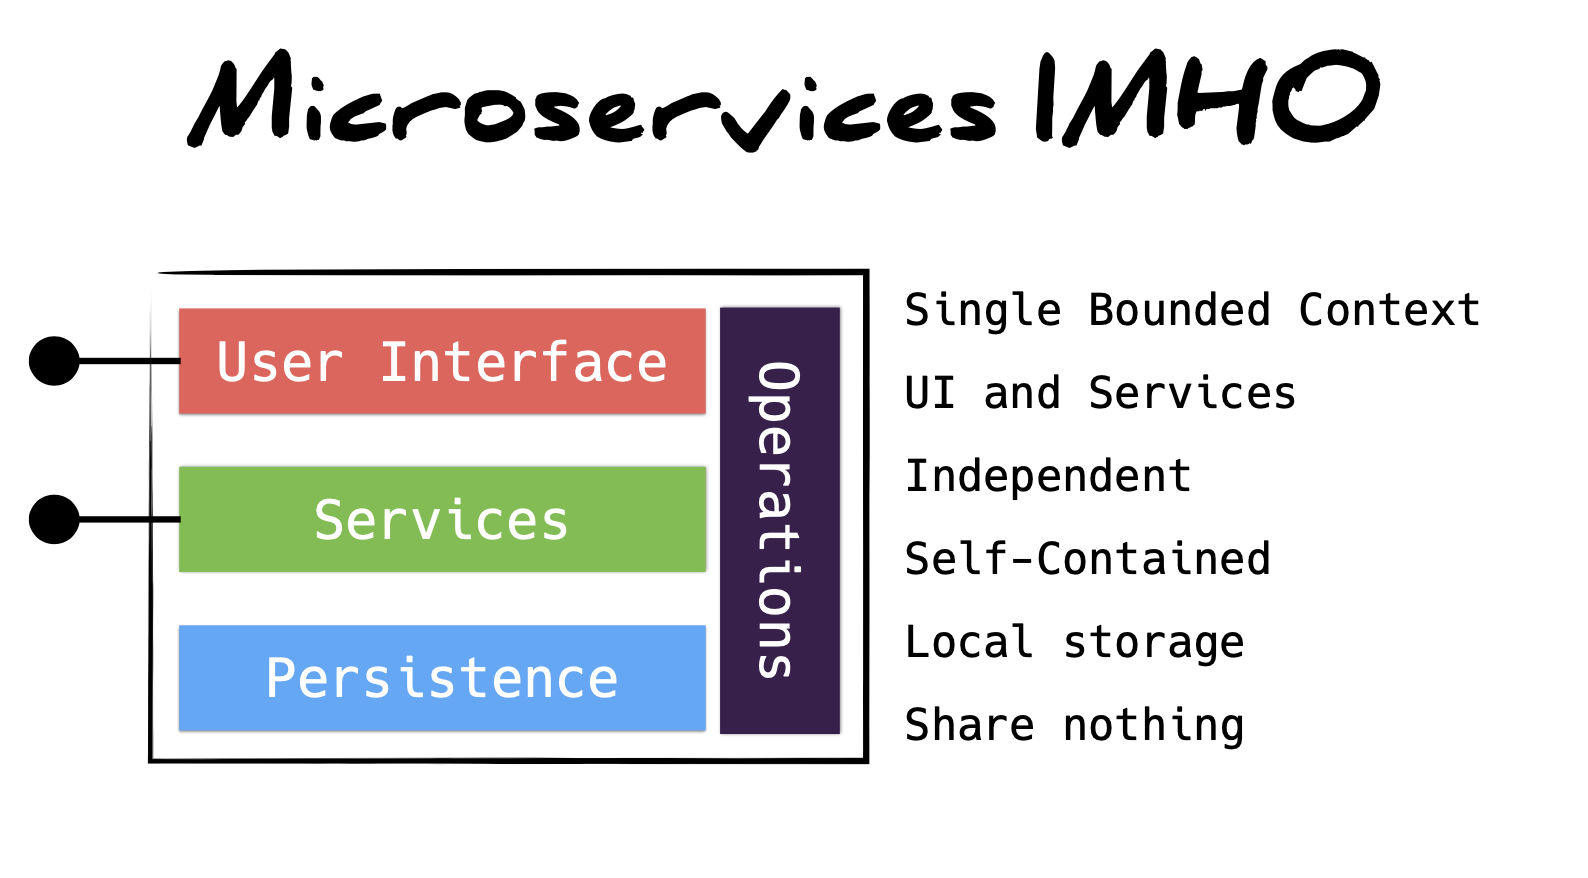 microservices